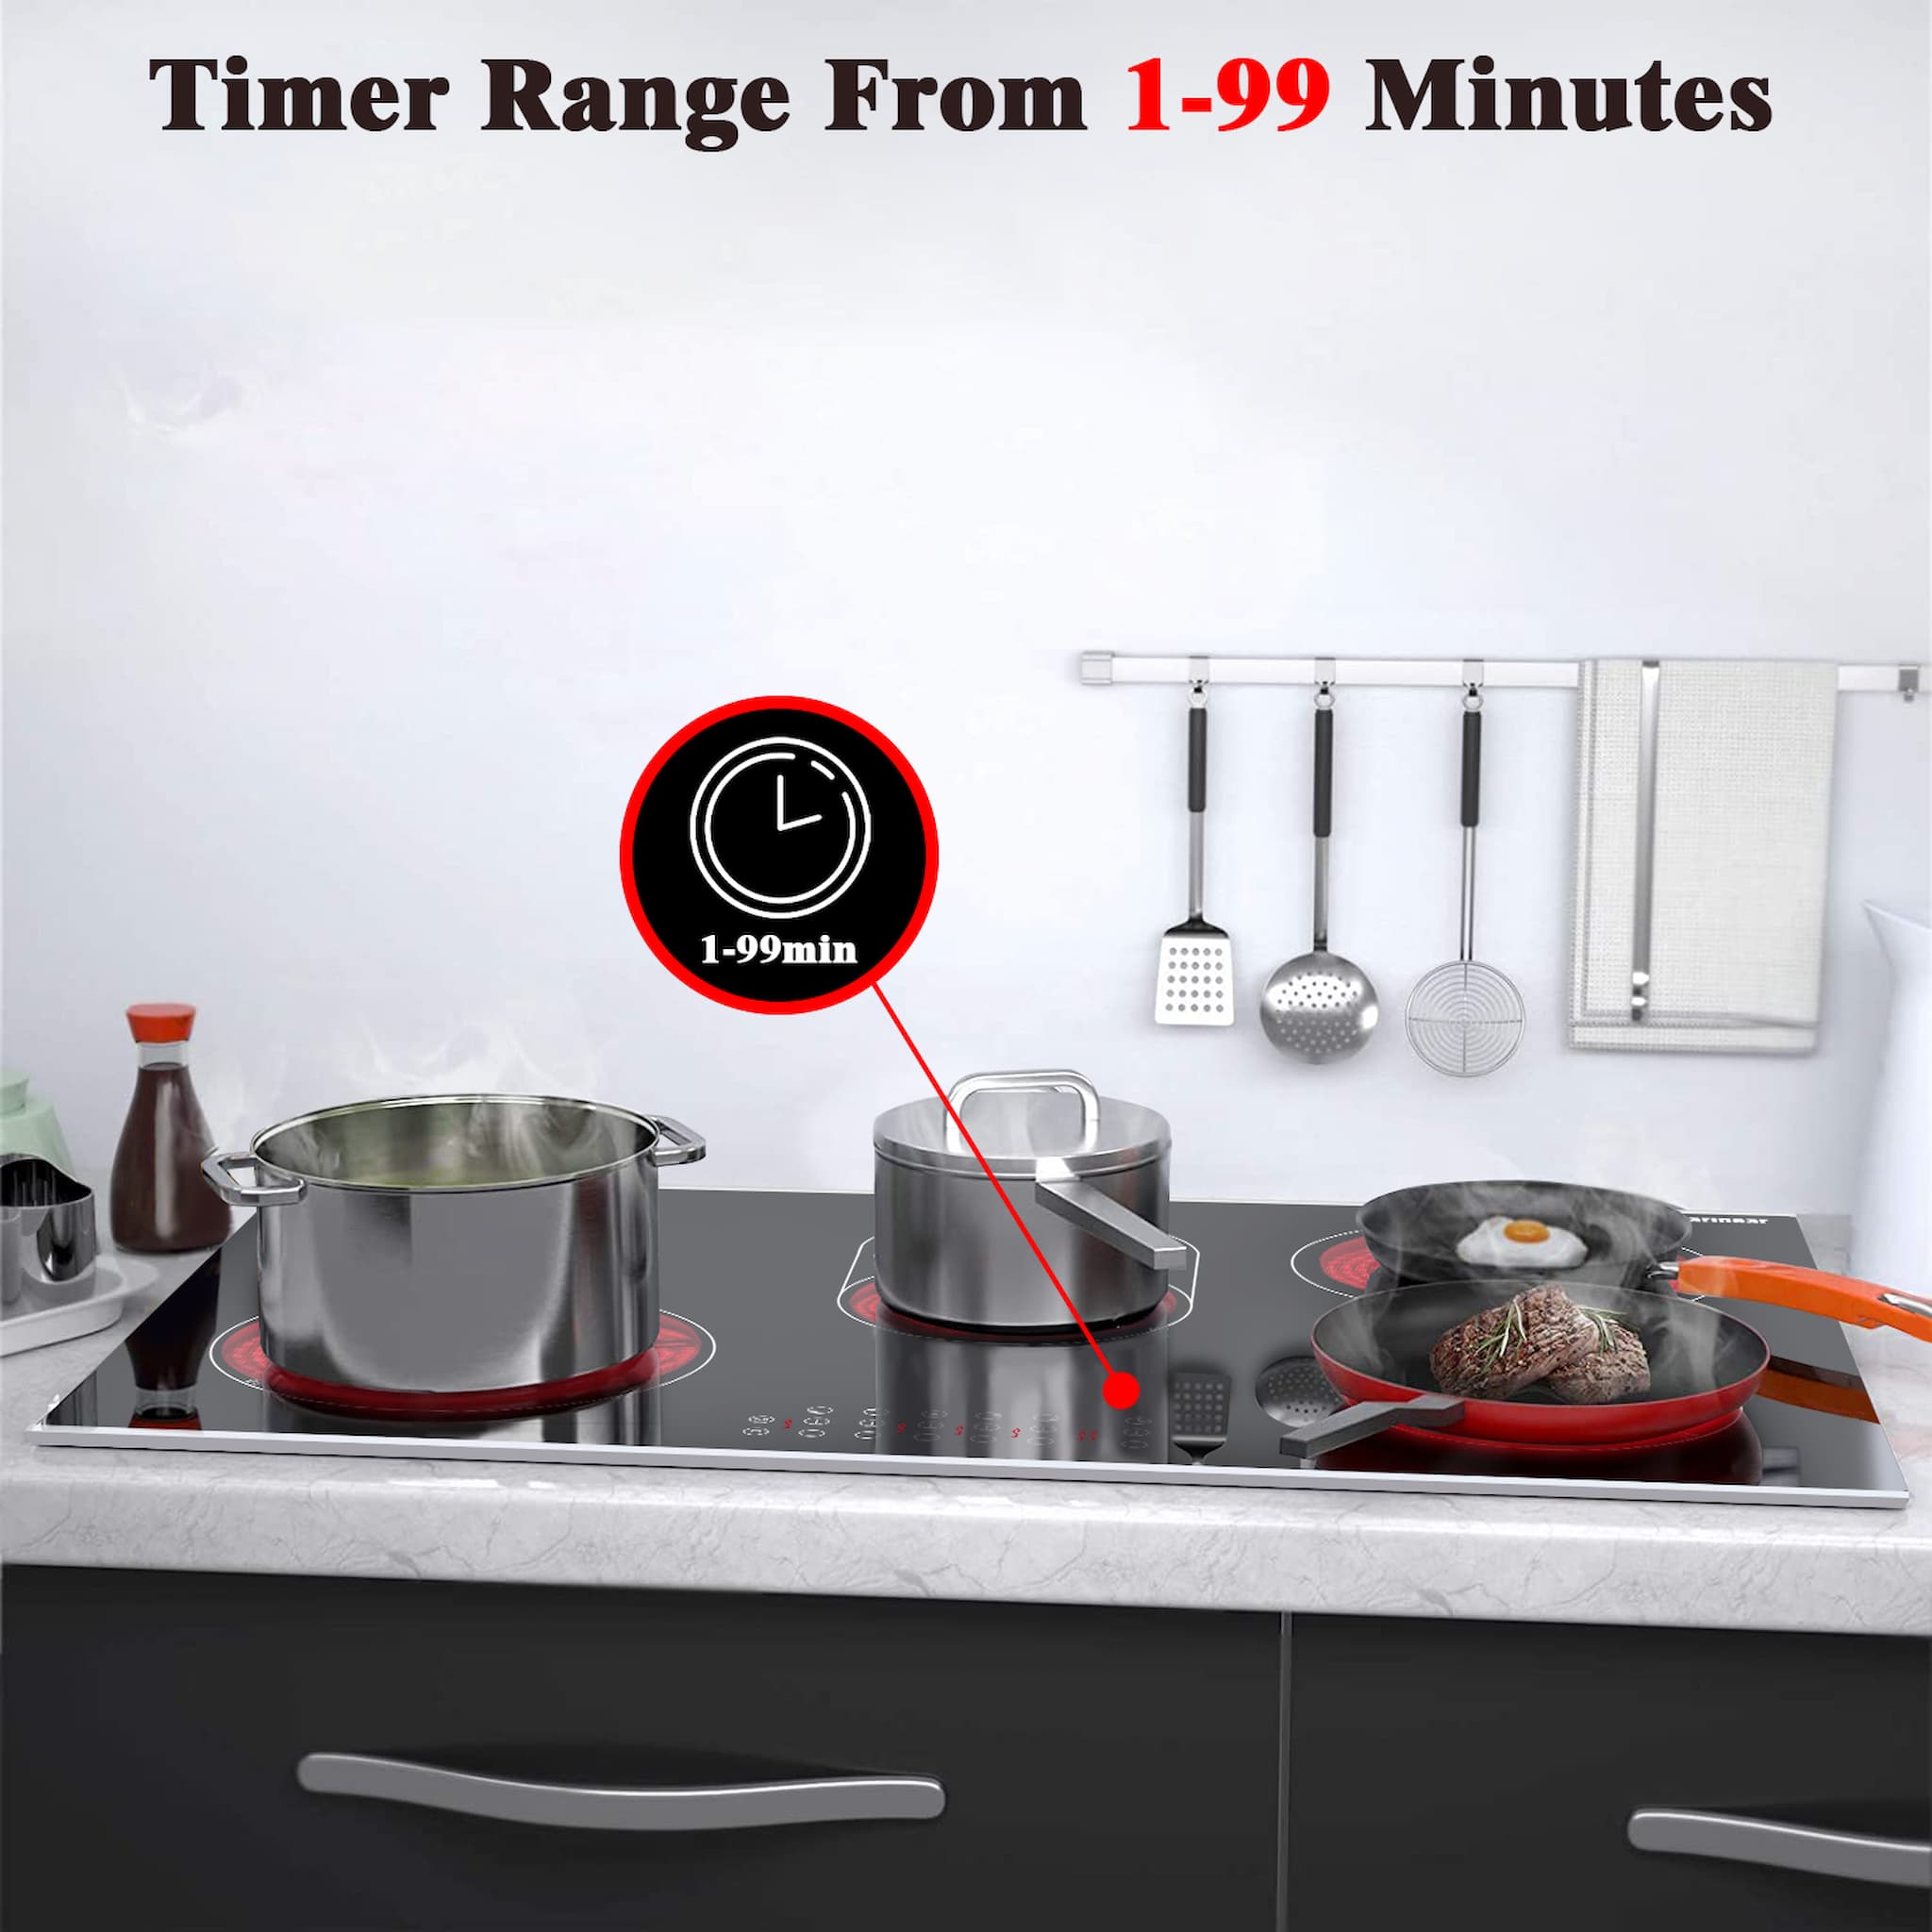  Cooksir Electric Cooktop 30 Inch, 5 Burner Built-in Electric  Stove Top with Glass Protection Metal Frame, 8400W Radiant Glass Cooktop,  Child Safety Lock, 99 Min Timer, 220-240V Hard Wired (No Plug) 